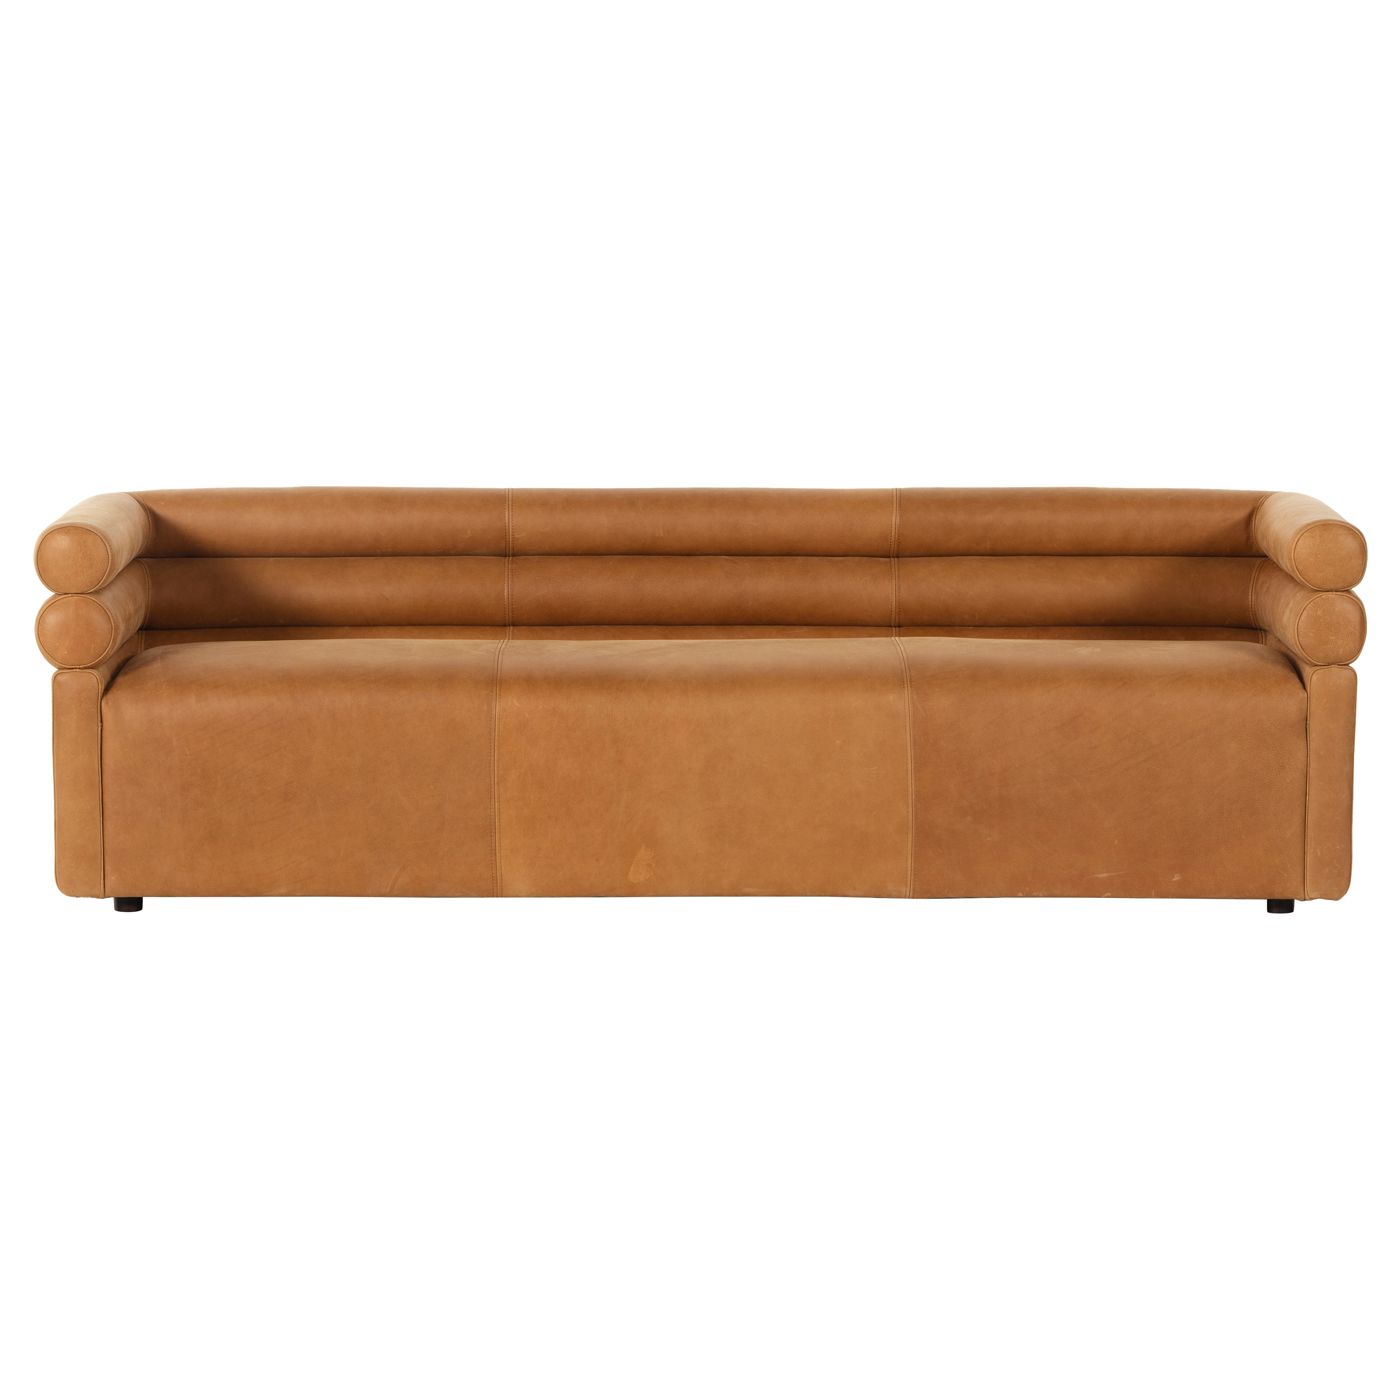 Eliana Mid Century Modern Brown Upholstered Leather Sofa - 88""W | Kathy Kuo Home